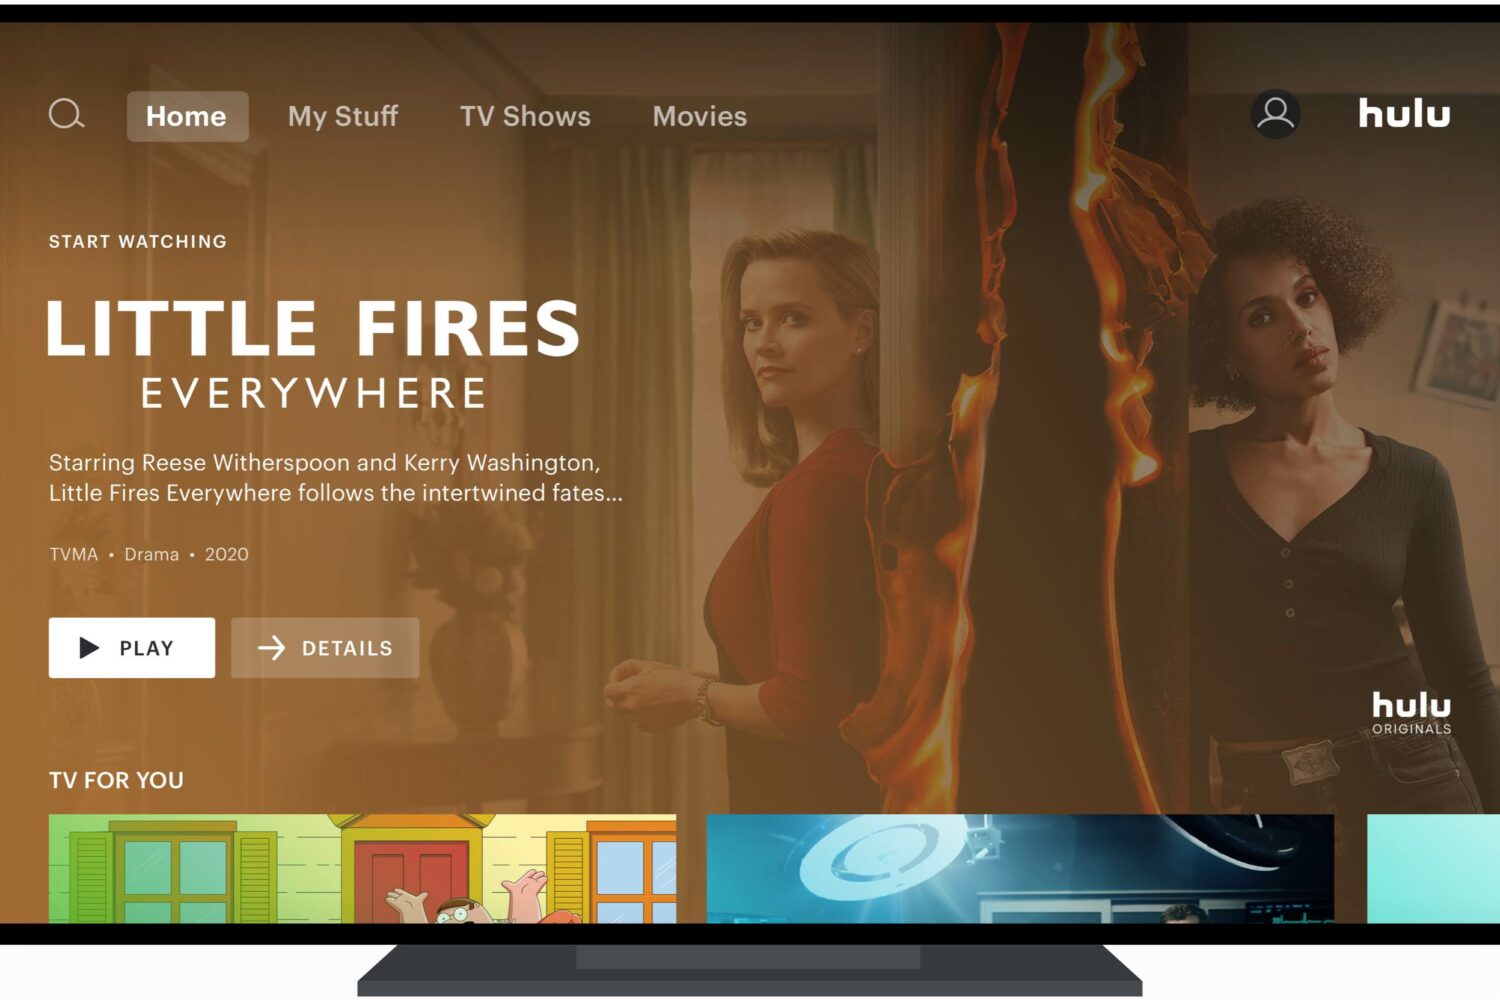 The redesigned Hulu home screen on Apple TV